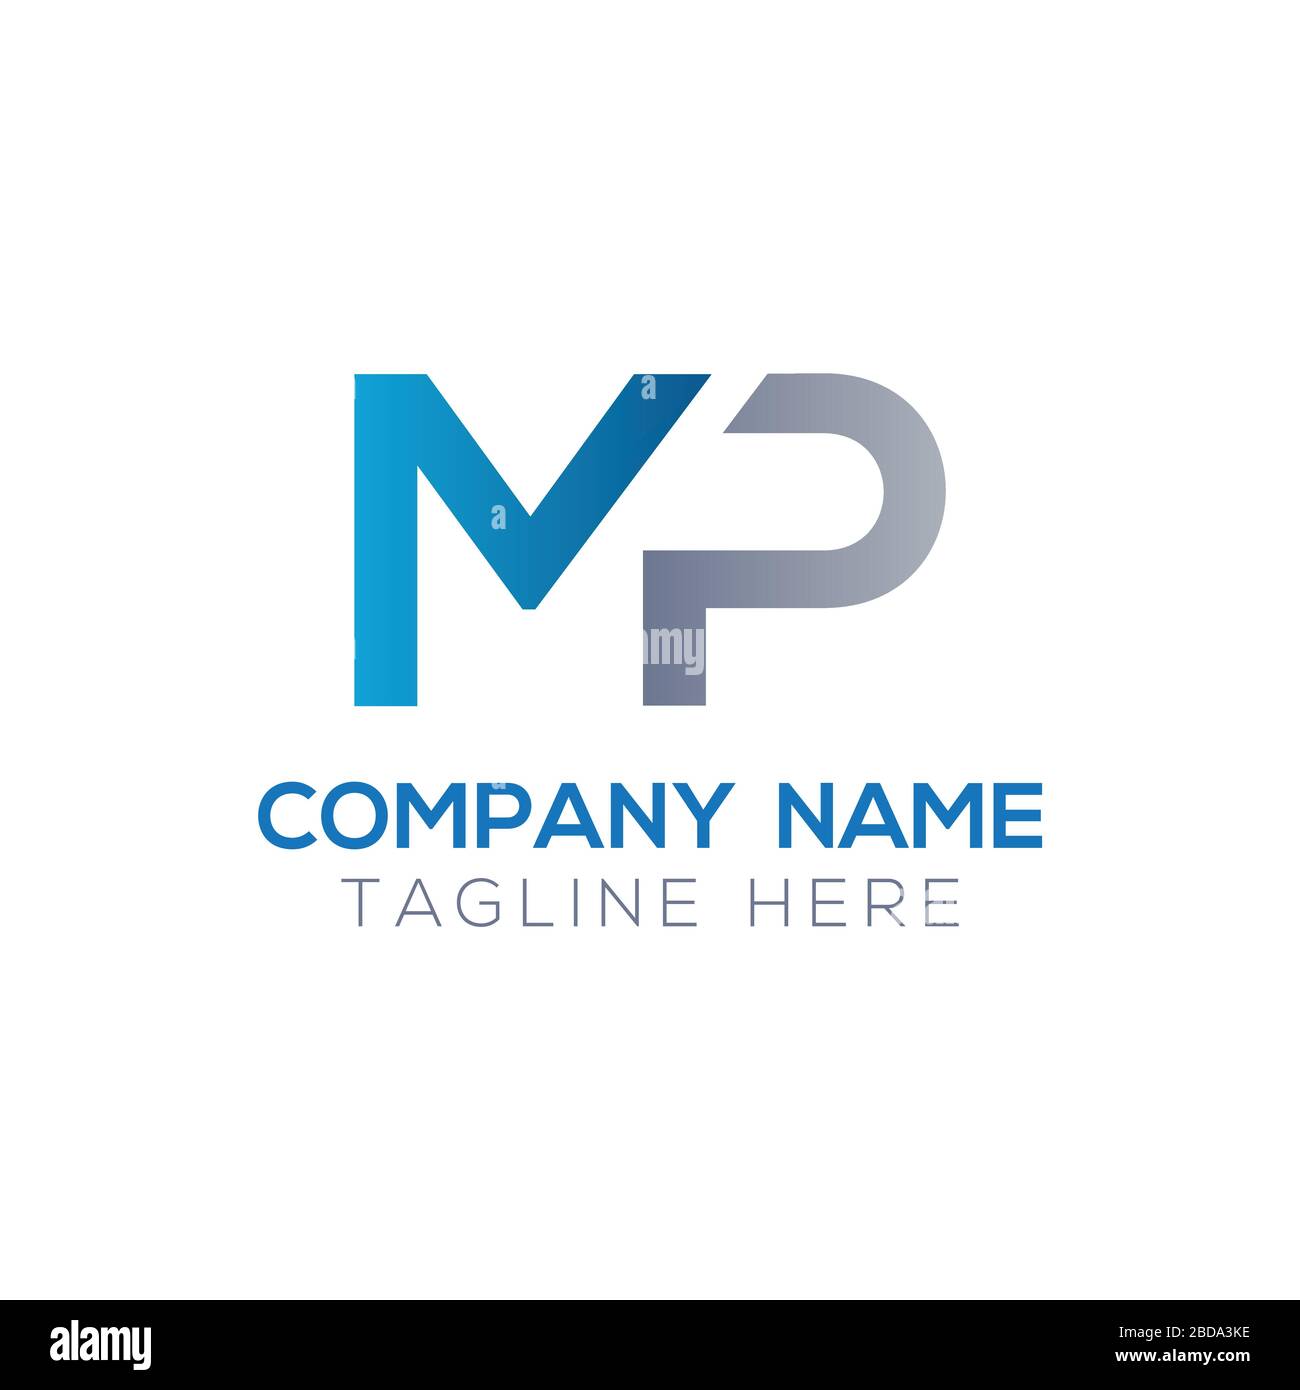 Minimal Innovative Initial M logo and MM logo. Letter PM LOGO AND